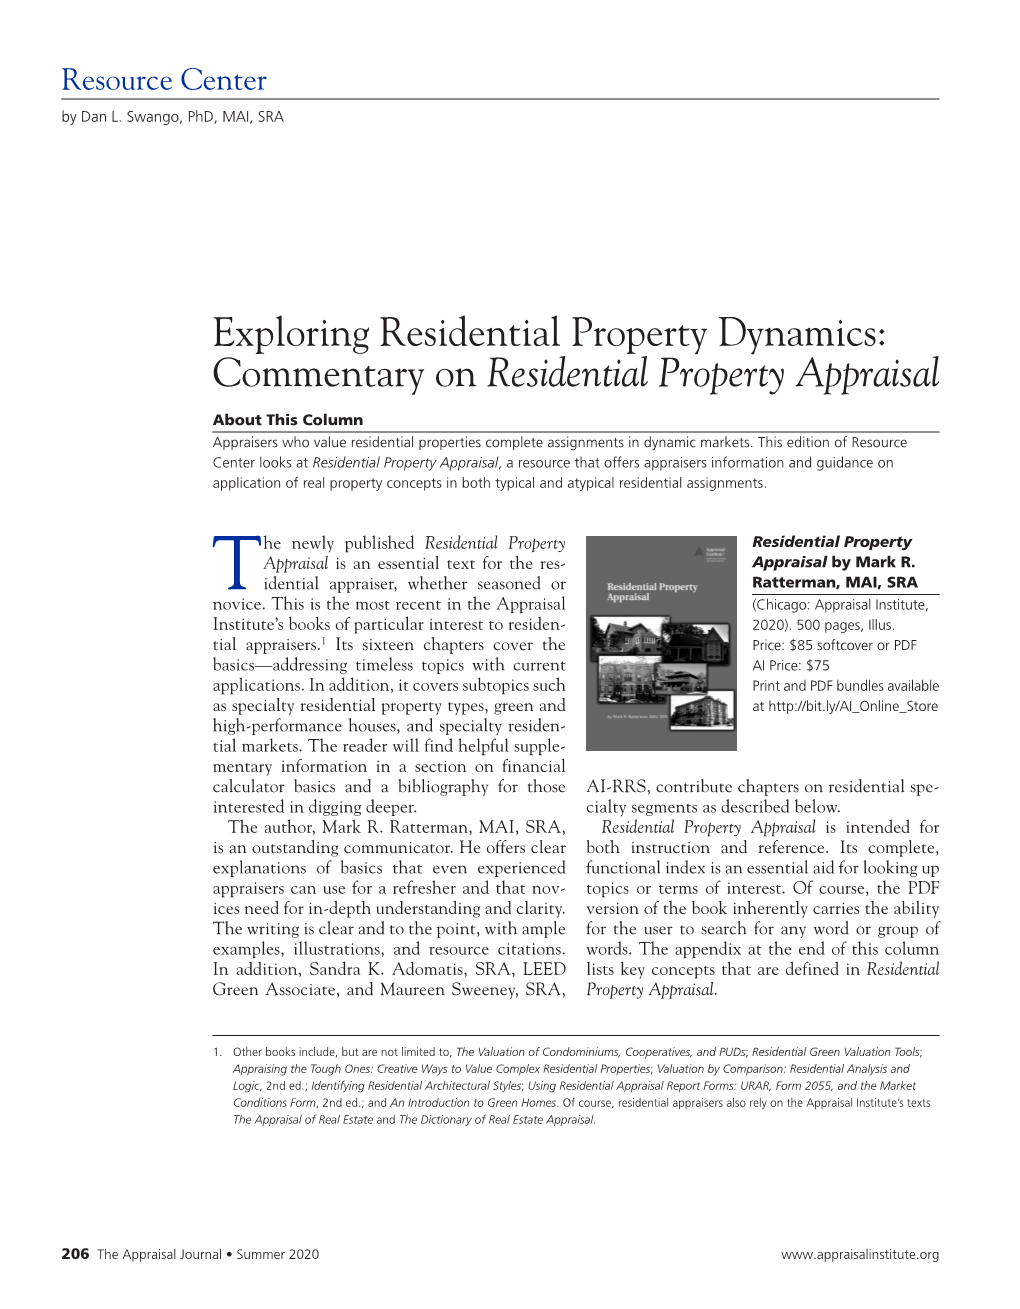 Commentary on Residential Property Appraisal